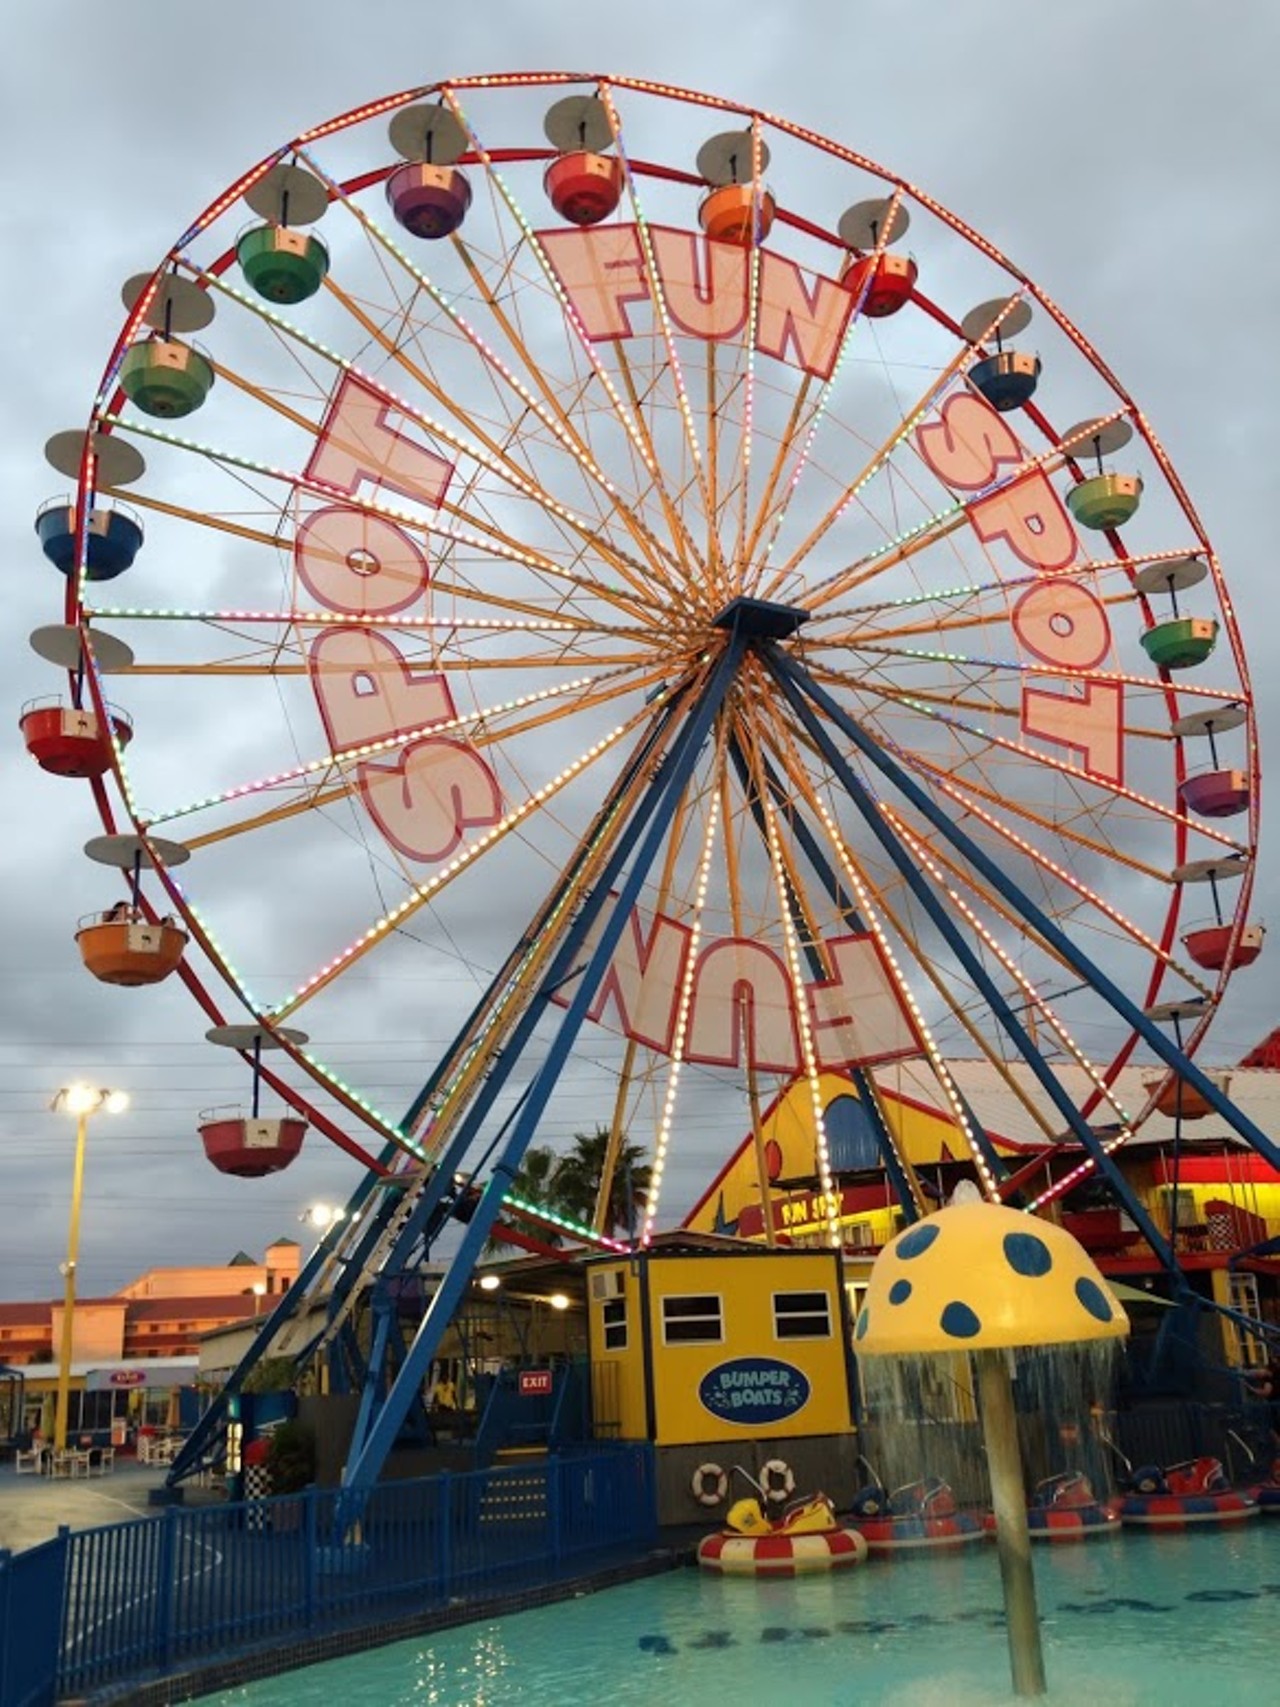 8. Because of this giant ferris wheel with huge Fun Spot logos on it.